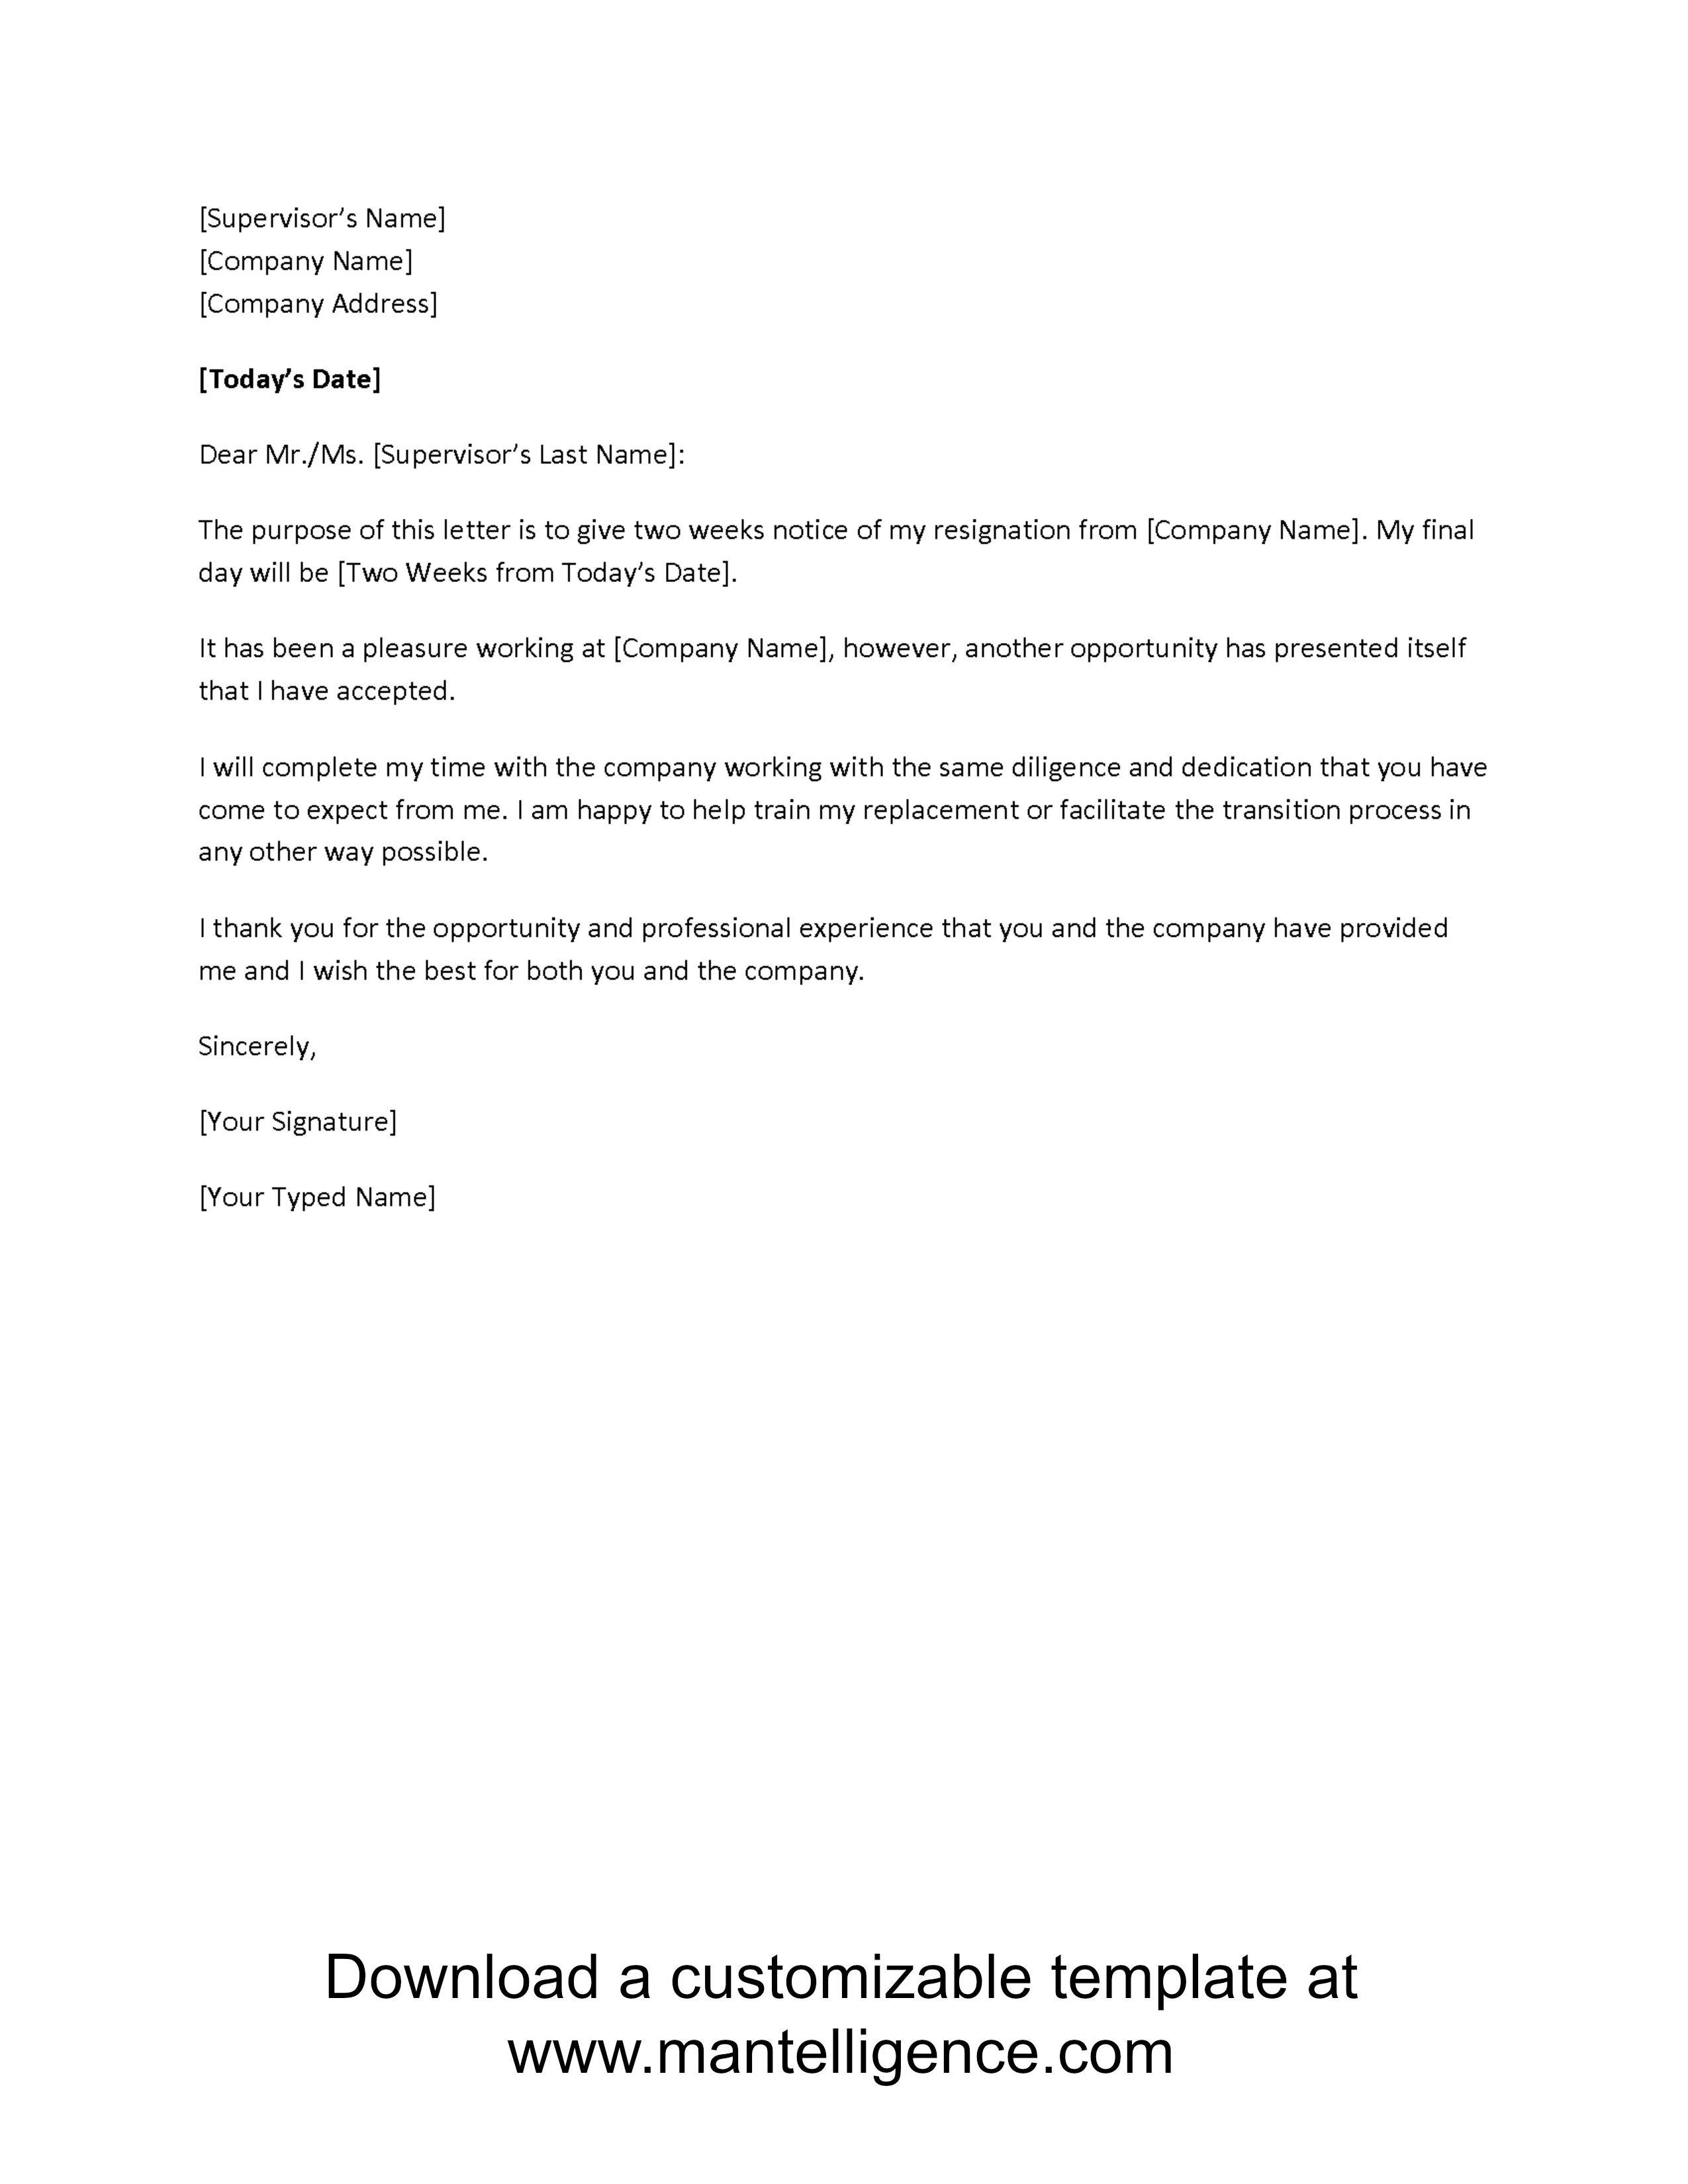 3 Highly Professional Two Weeks Notice Letter Templates | Letter 